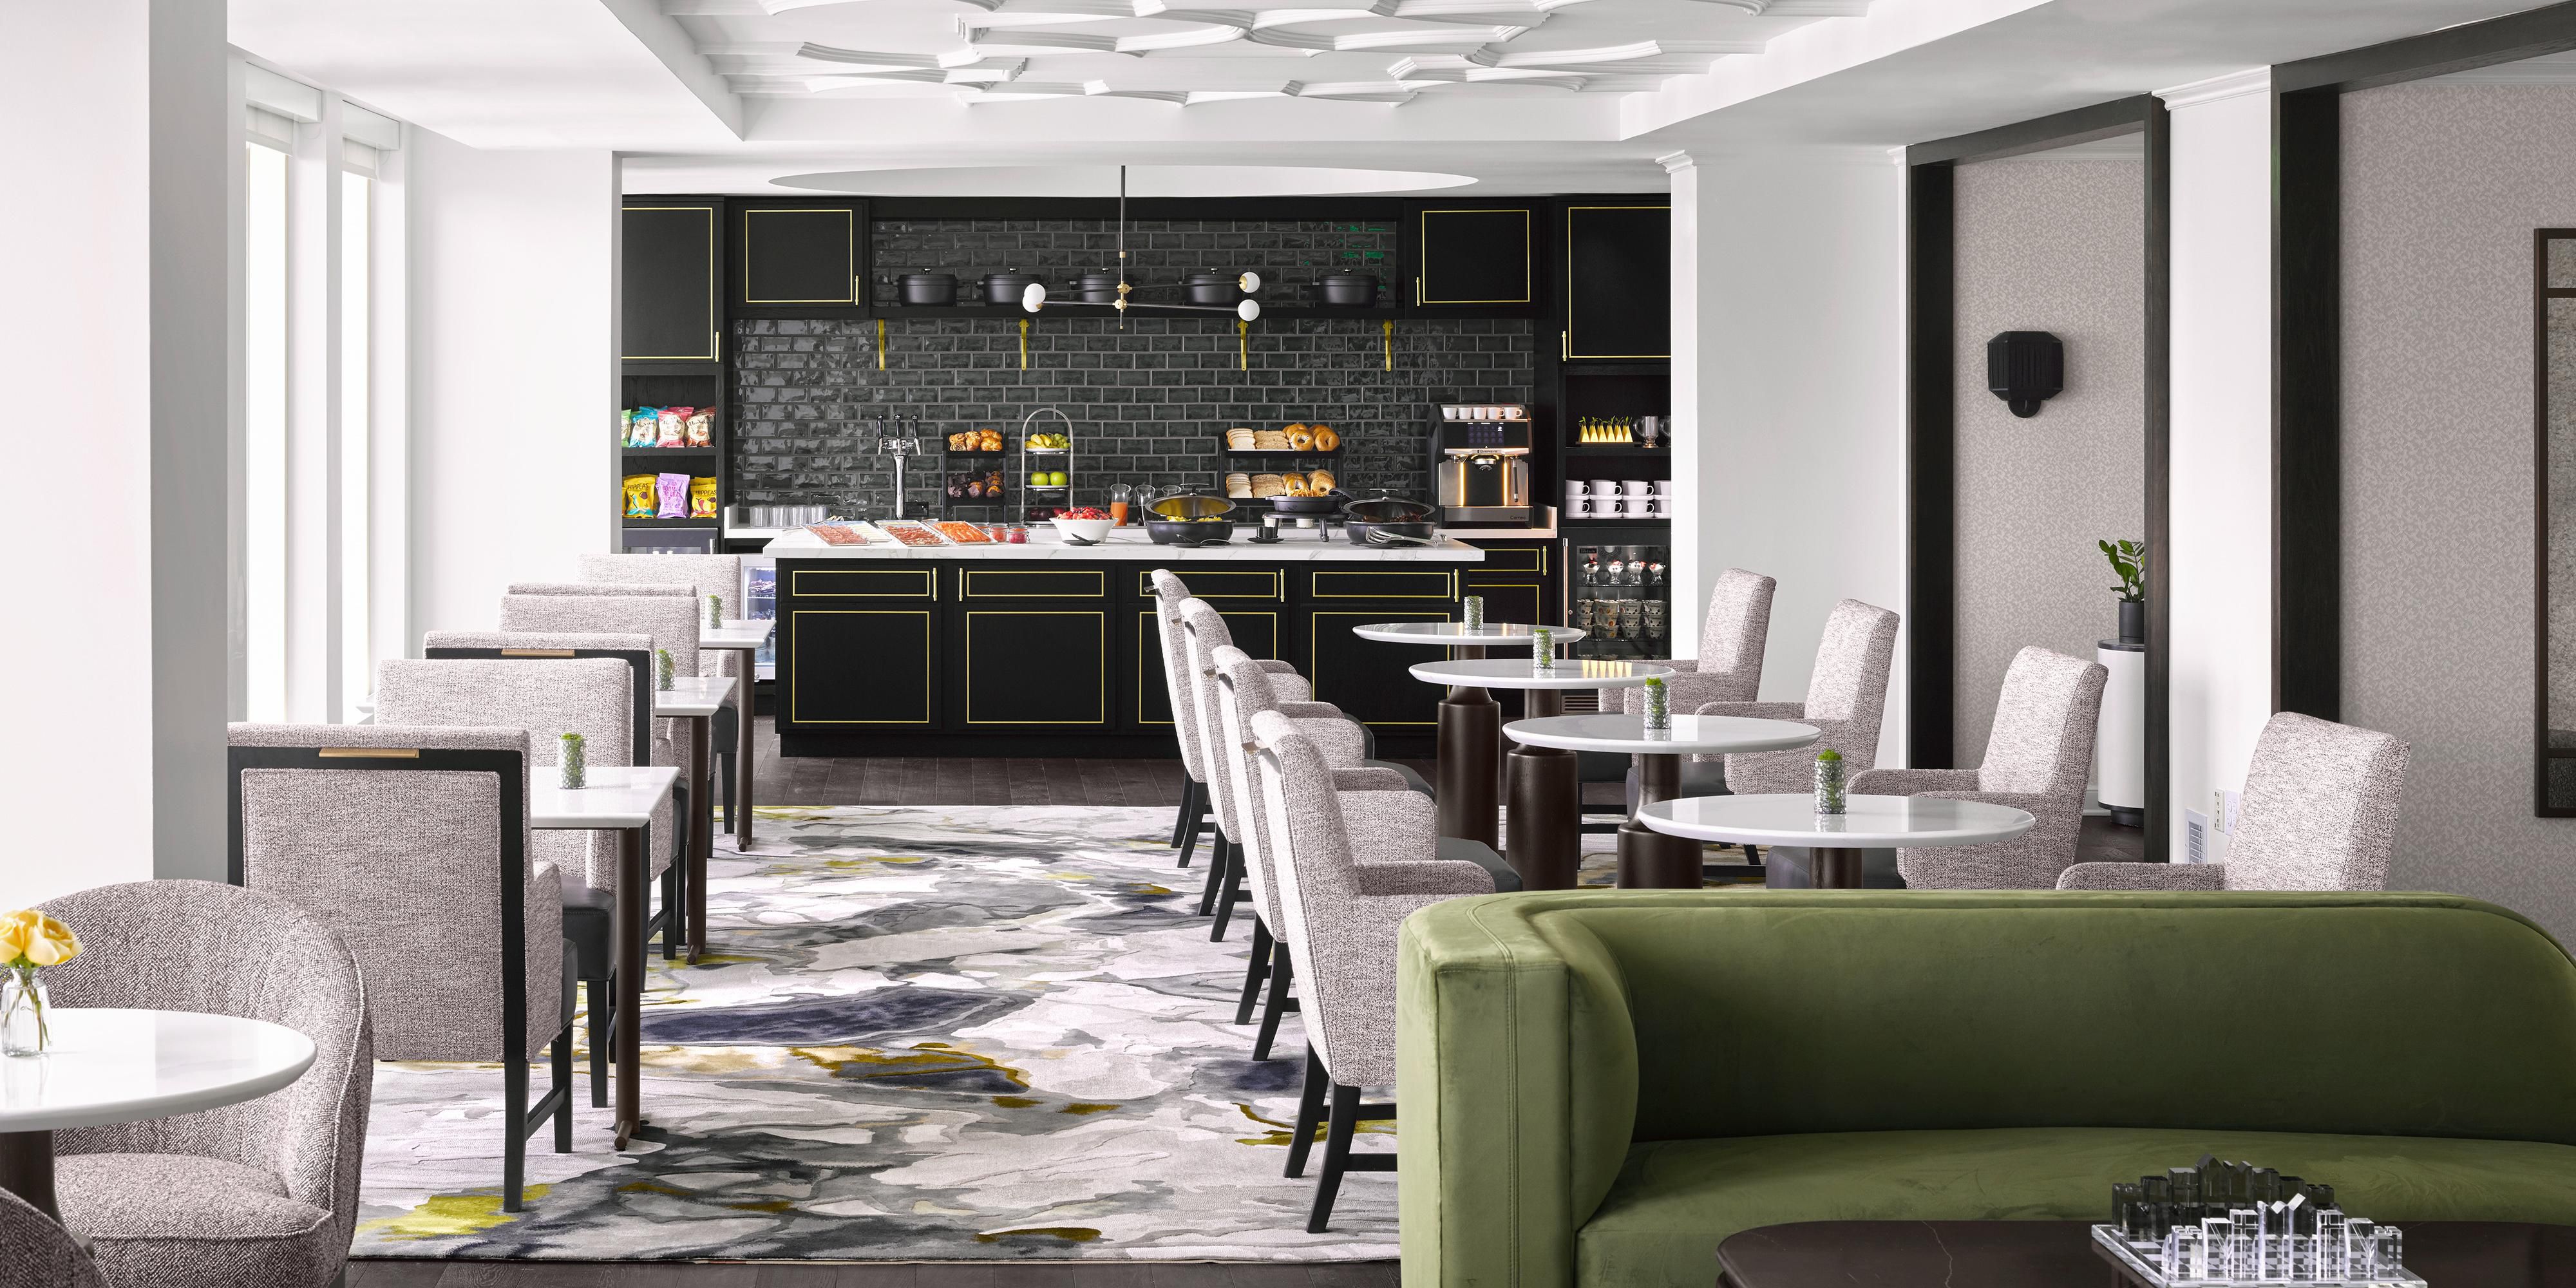 Work or unwind in our freshly redesigned Club Lounge, a sky-high retreat featuring stunning skyline views of Buckhead. The Club Lounge experience includes daily culinary presentations with welcome drinks, an American breakfast buffet, all-day snacks and beverages, evening drinks and canapés from 6-8pm. 